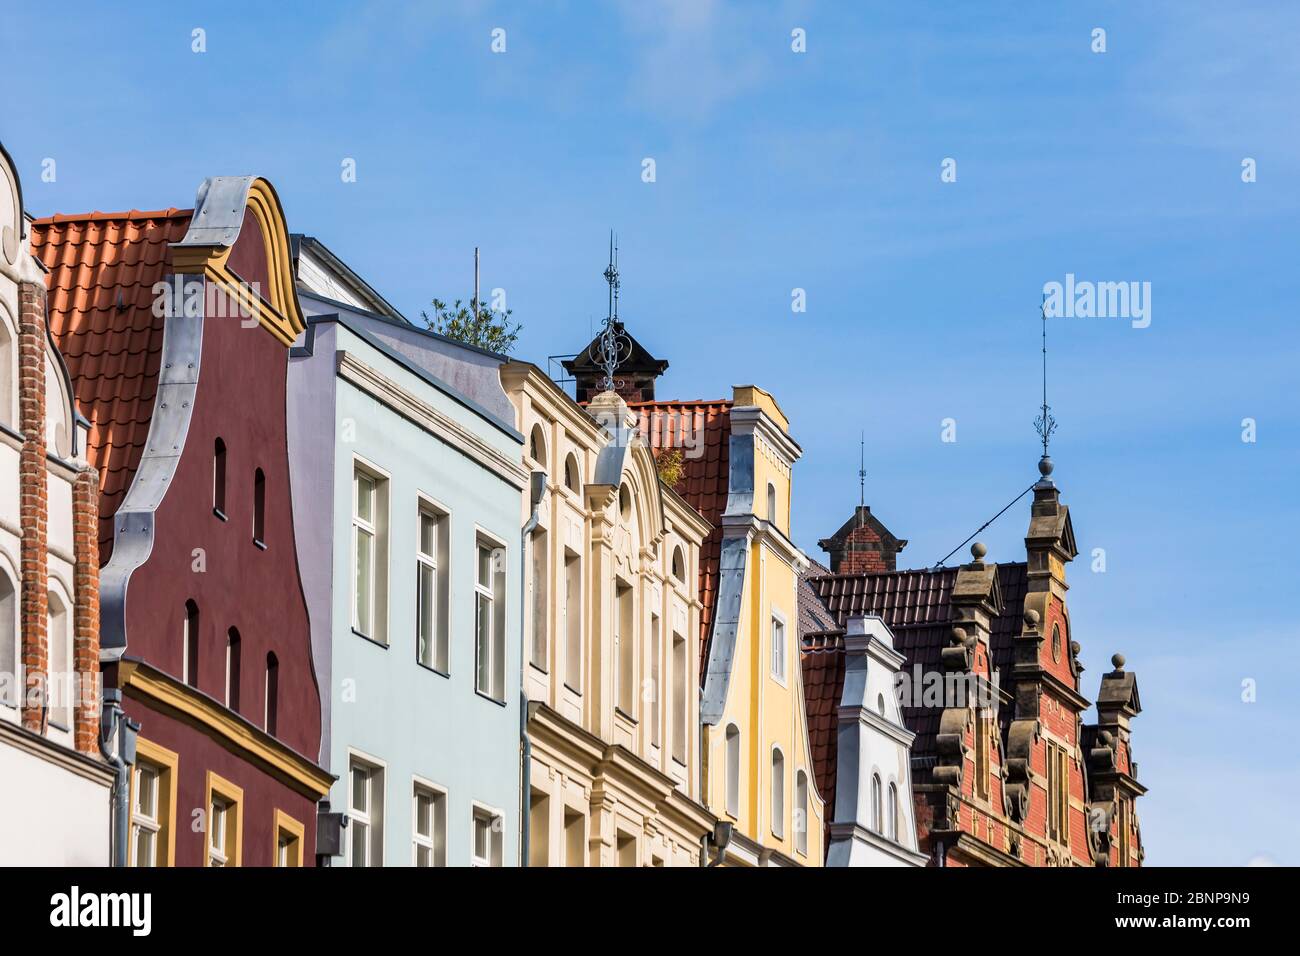 Germany, Mecklenburg-West Pomerania, Baltic Sea coast, Stralsund, old town, historic houses, gabled houses, house facades Stock Photo